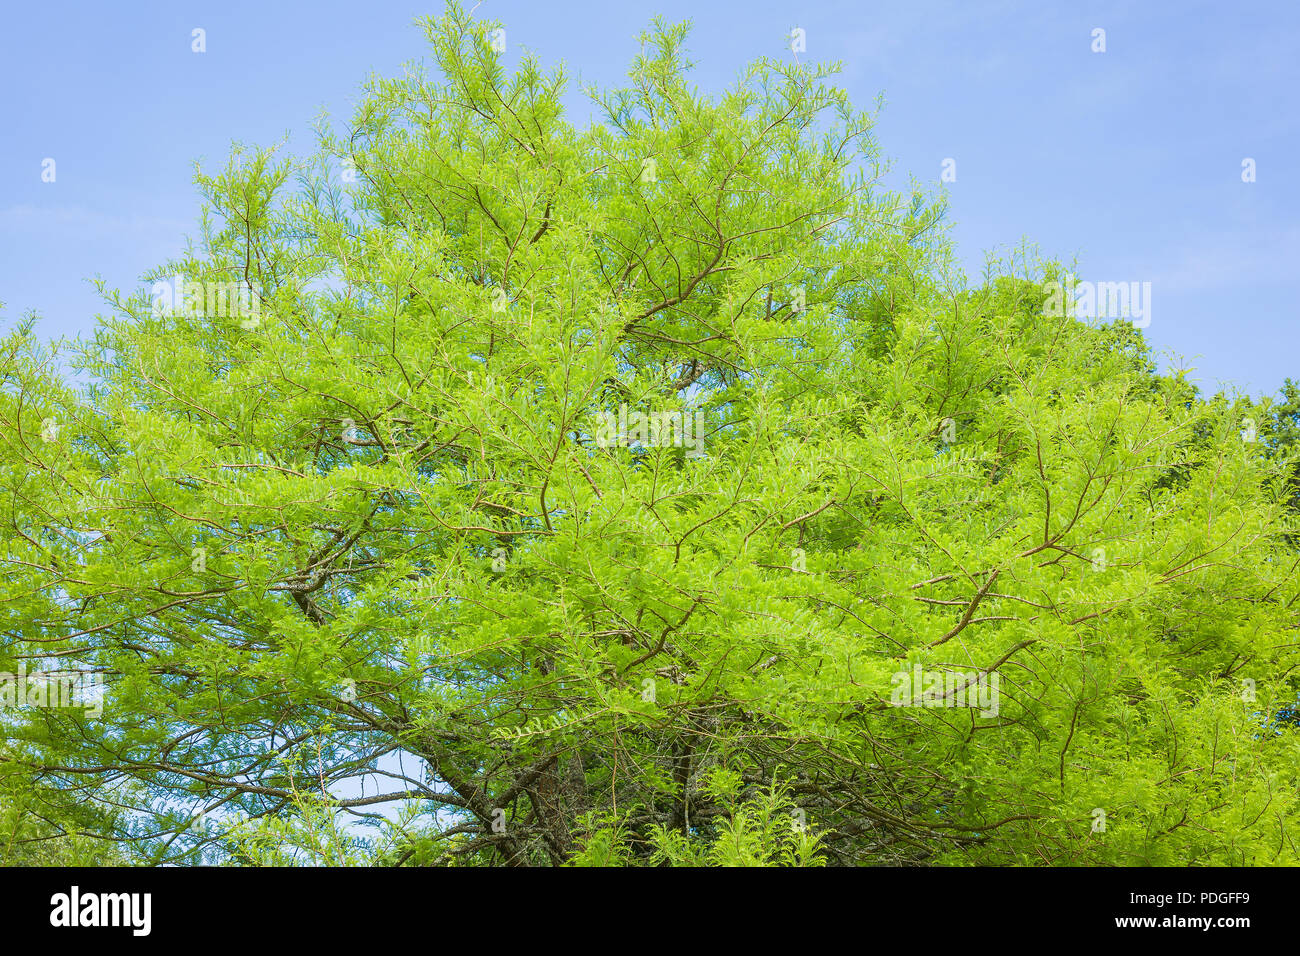 Swamp Cypress tree with light green feathery foliage in an English garden in June Stock Photo